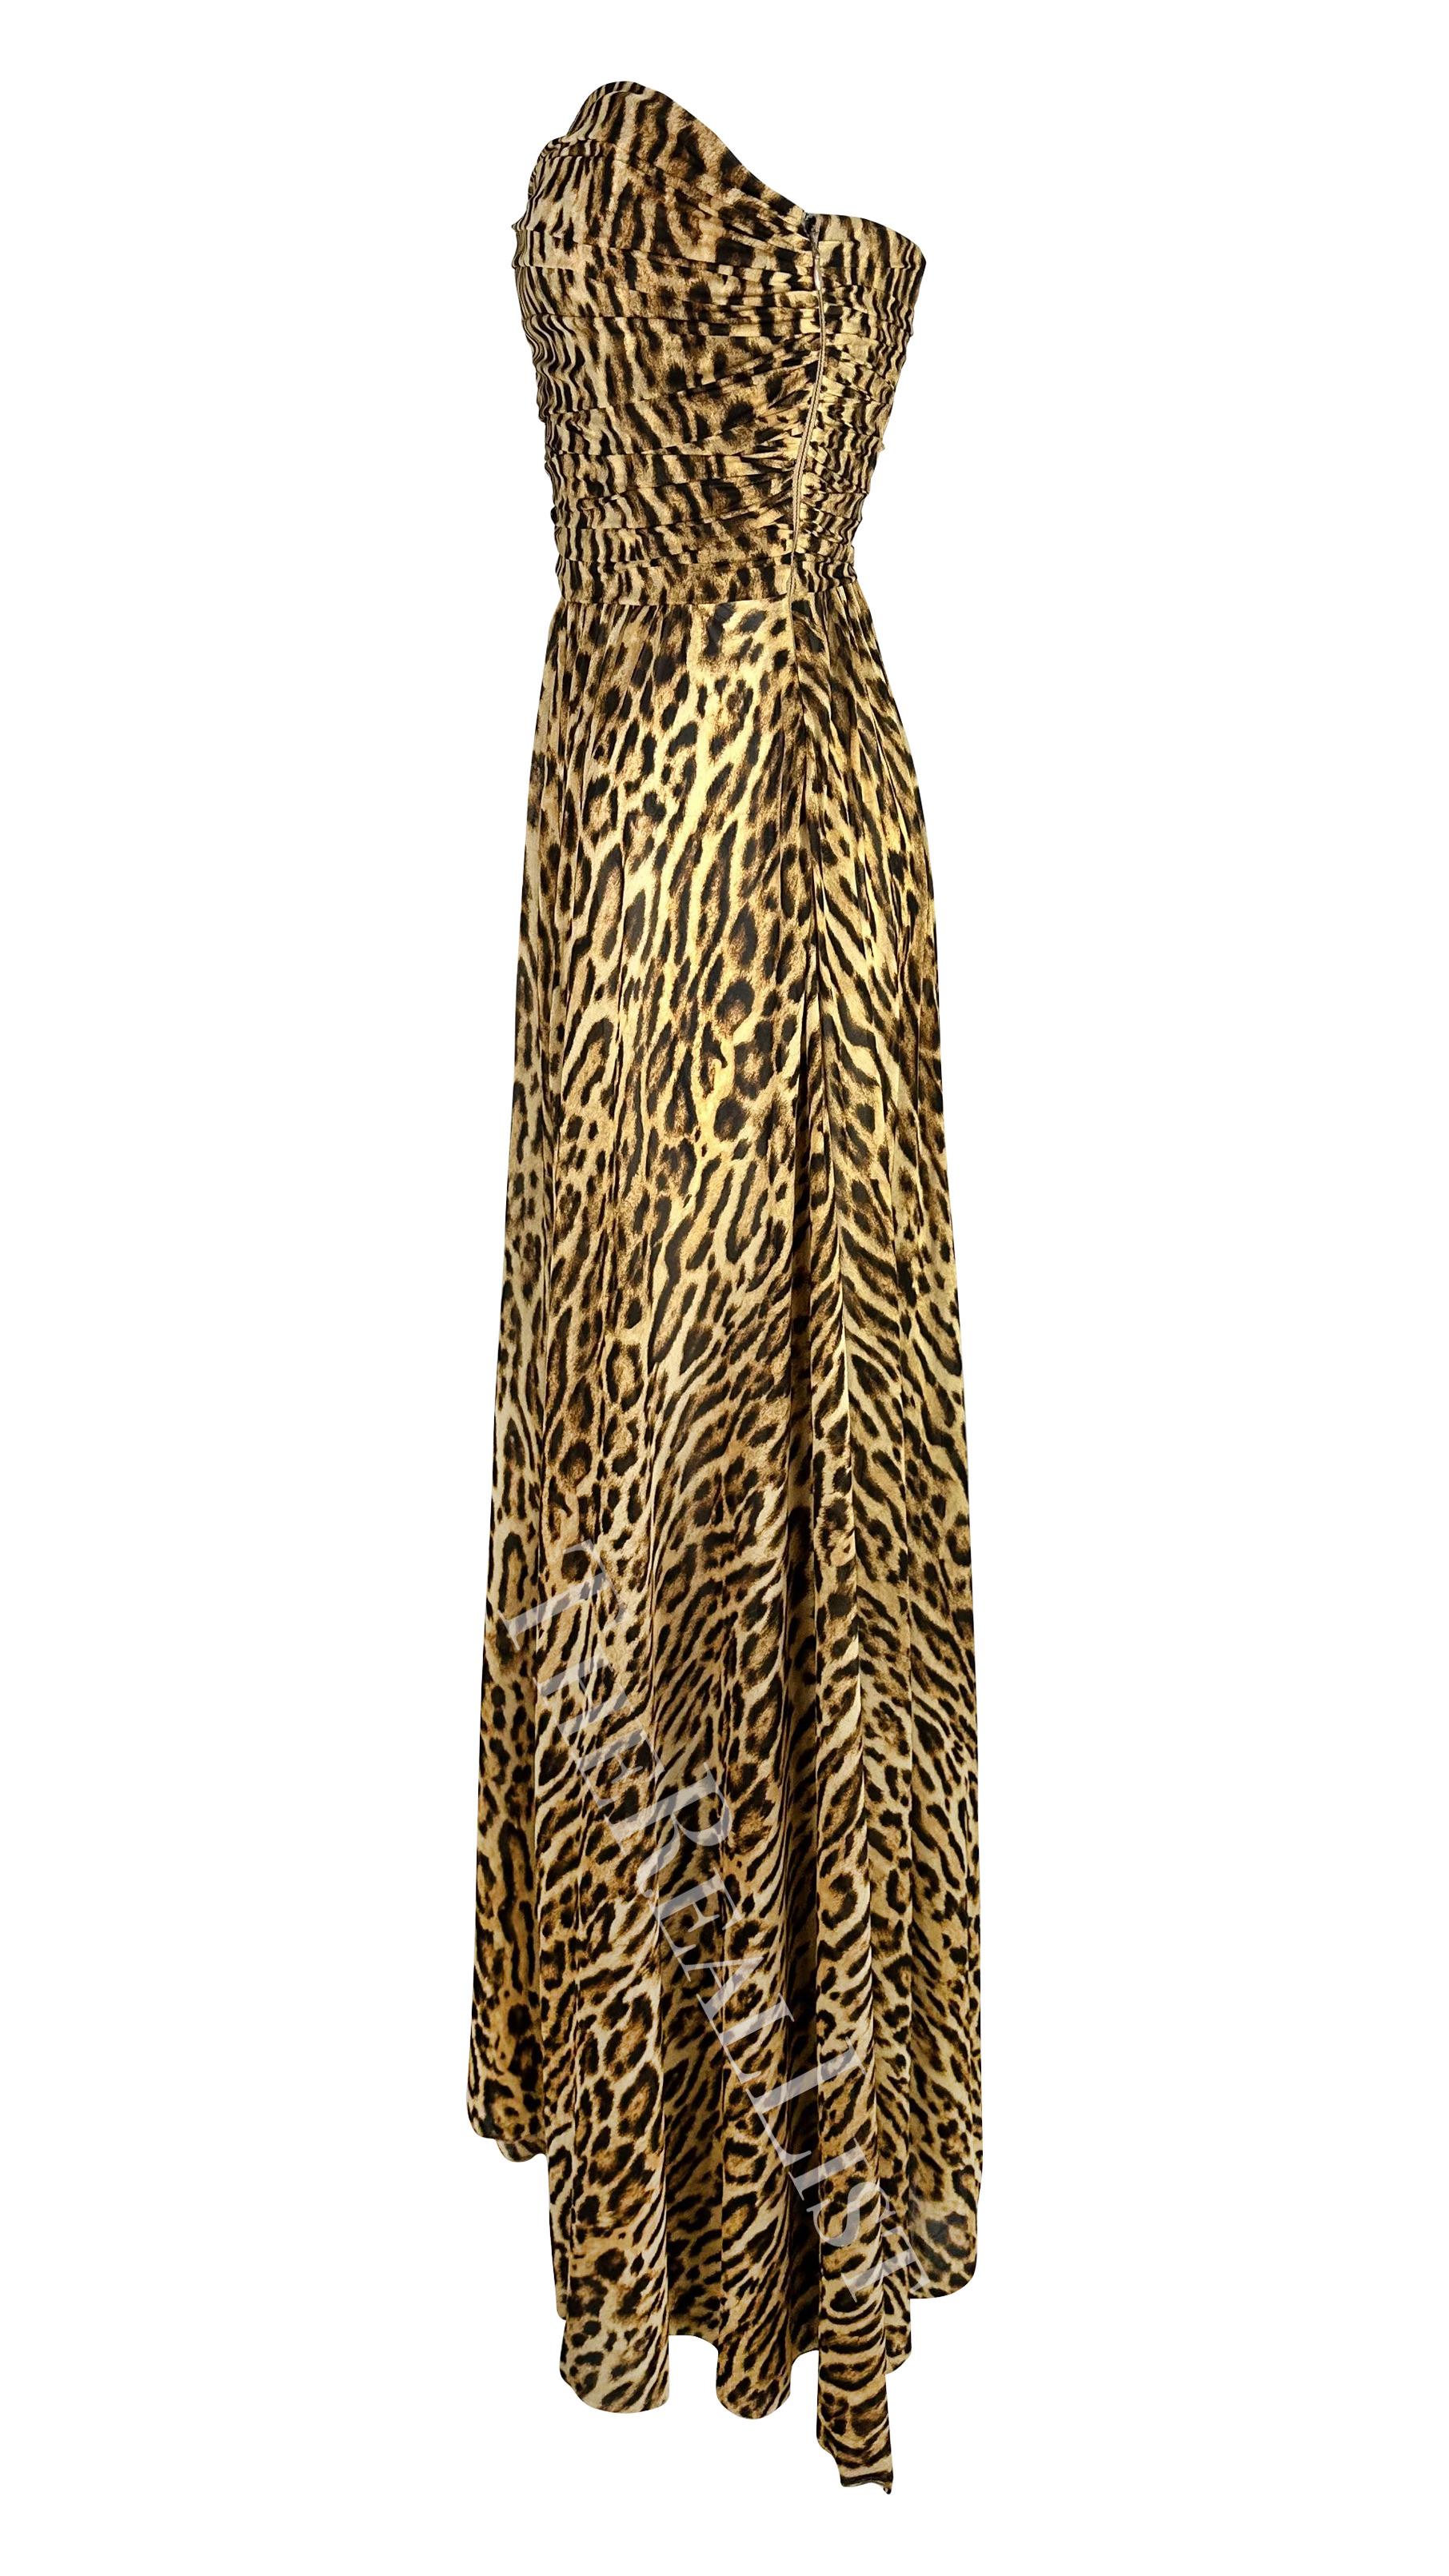 NWT F/W 2004 Celine by Michael Kors Runway Strapless Cheetah Print Gown  For Sale 3